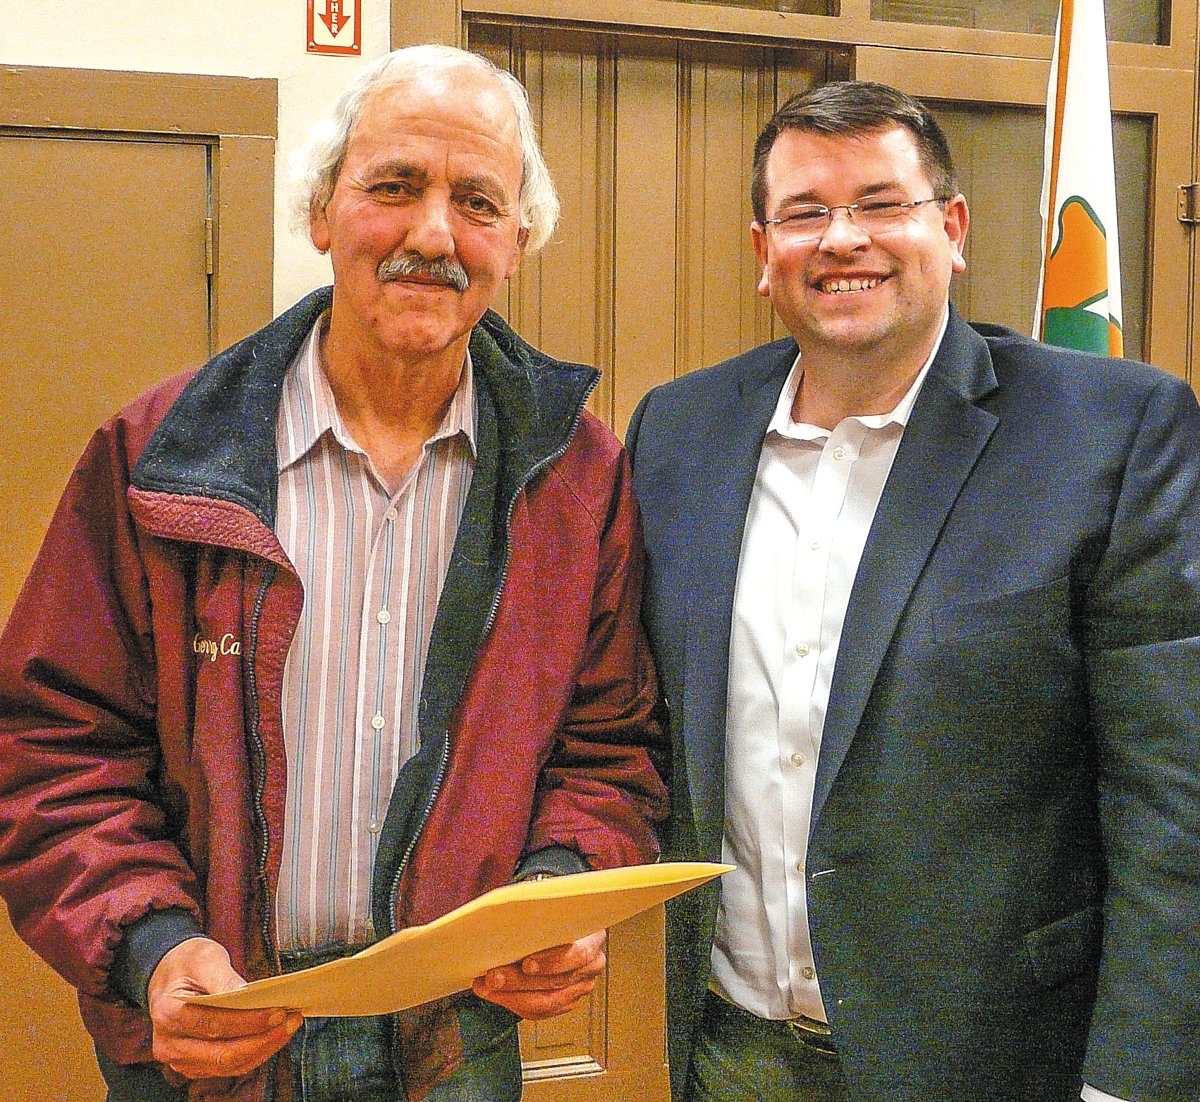 Assistant sewer operator Jerry Case, left, is praised upon the occasion of his retirement by Frenchtown, N.J., Mayor Brad Myhre. He is a 32-year borough employee. Photograph by Rick Epstein.